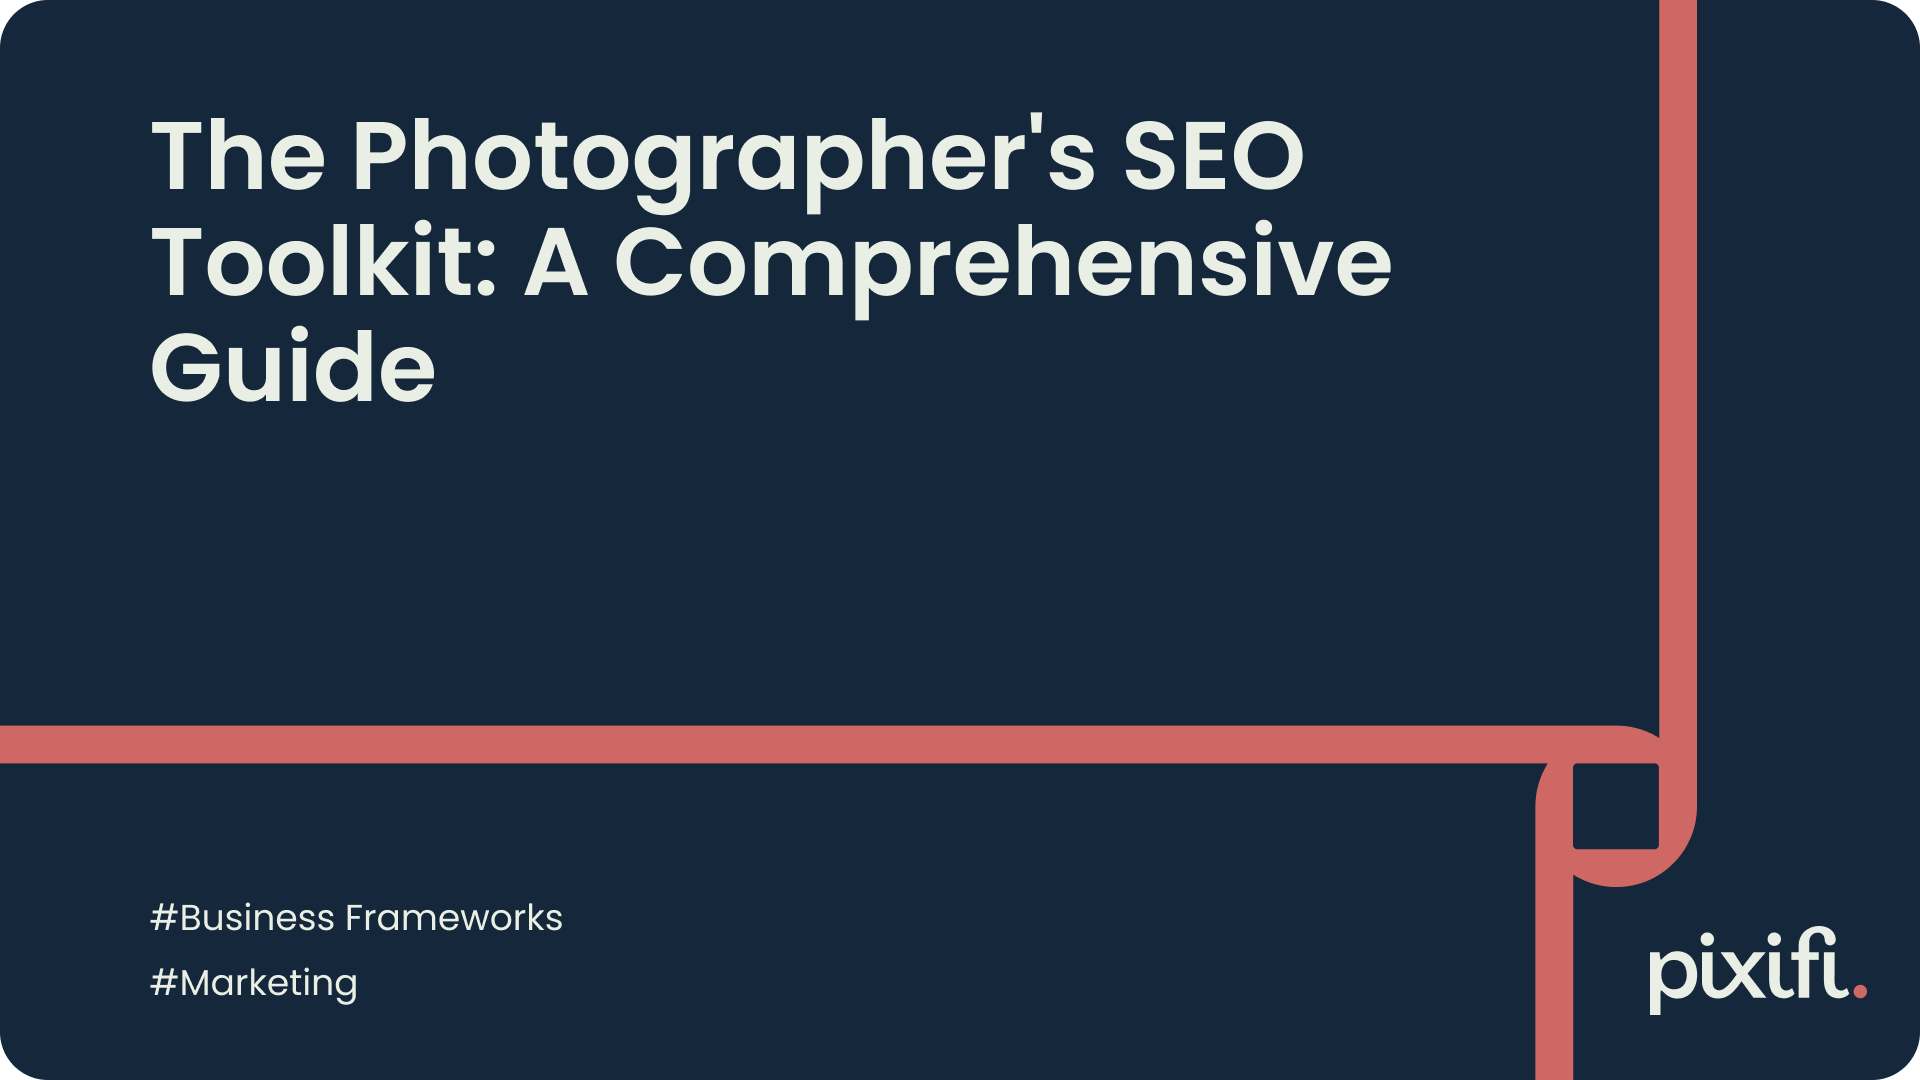 The Photographer's SEO Toolkit: A Comprehensive Guide